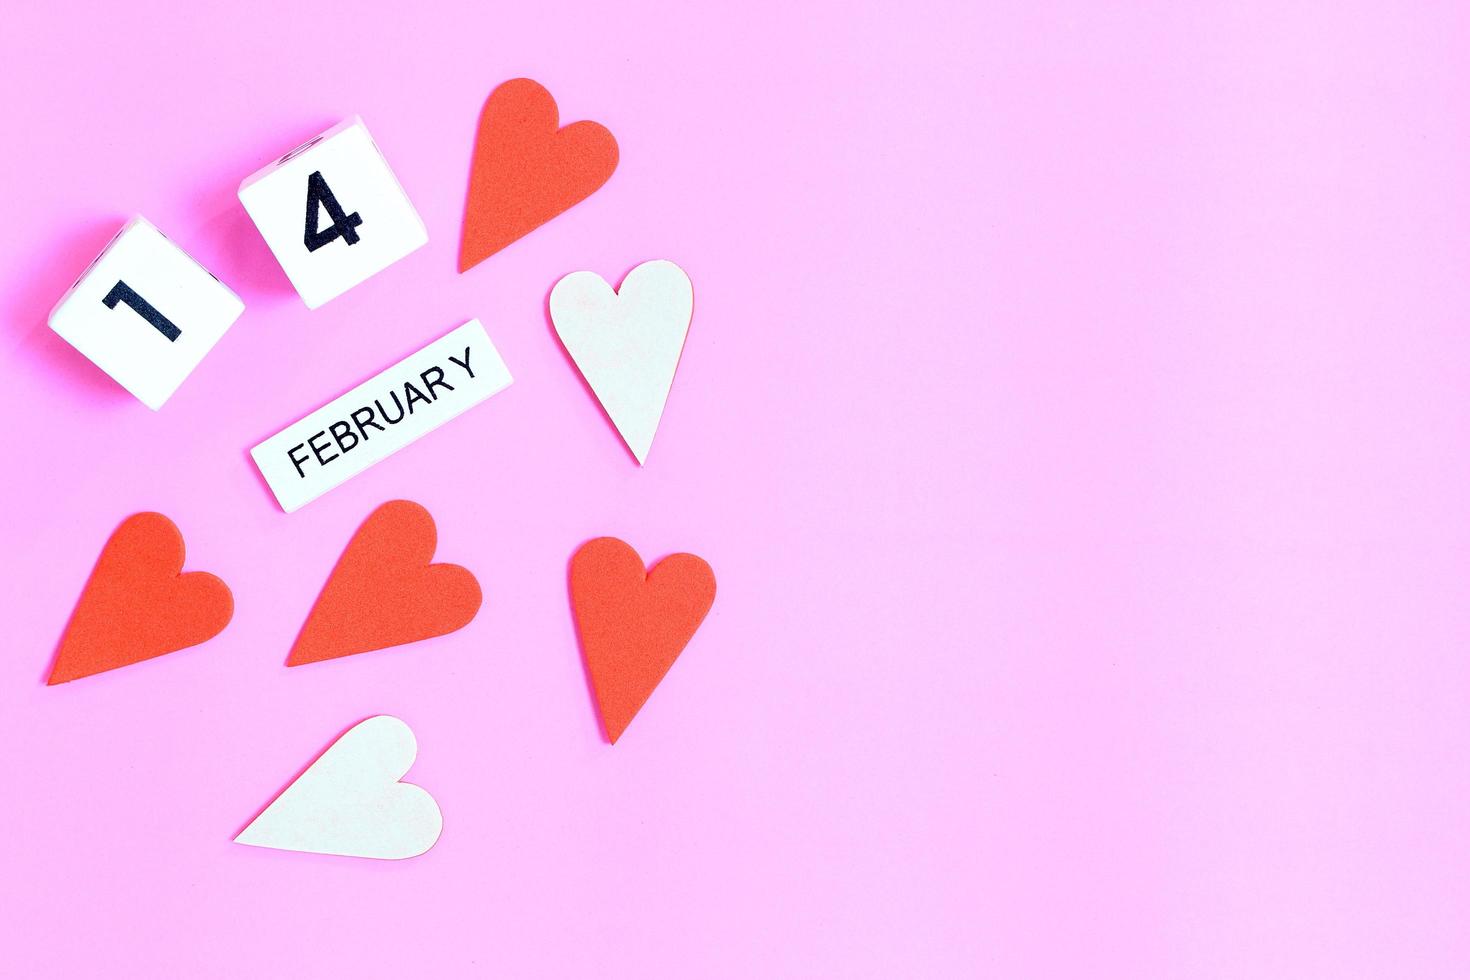 February 14 with hearts on a purple background photo